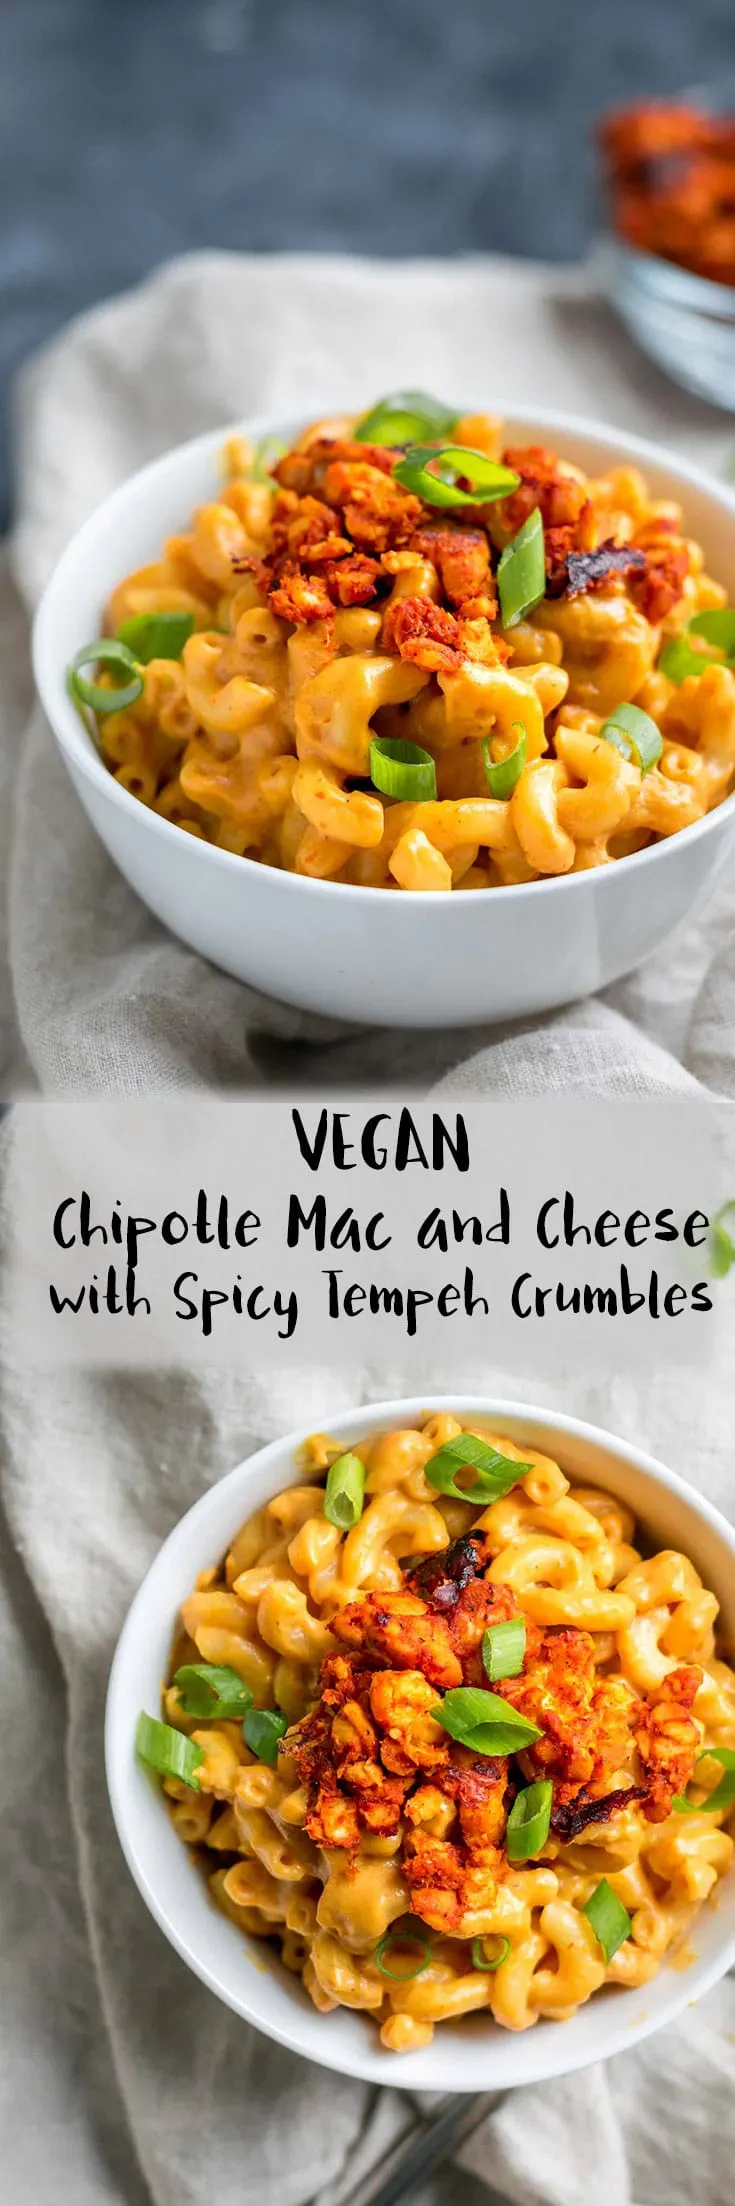 Creamy, smokey and spicy chipotle mac and cheese is topped with spicy chipotle marinated tempeh crumbles and scallion greens in this delicious vegan entree. The recipe is easily made gluten free. | thecuriouschickpea.com #vegan #macandcheese #vegancheese